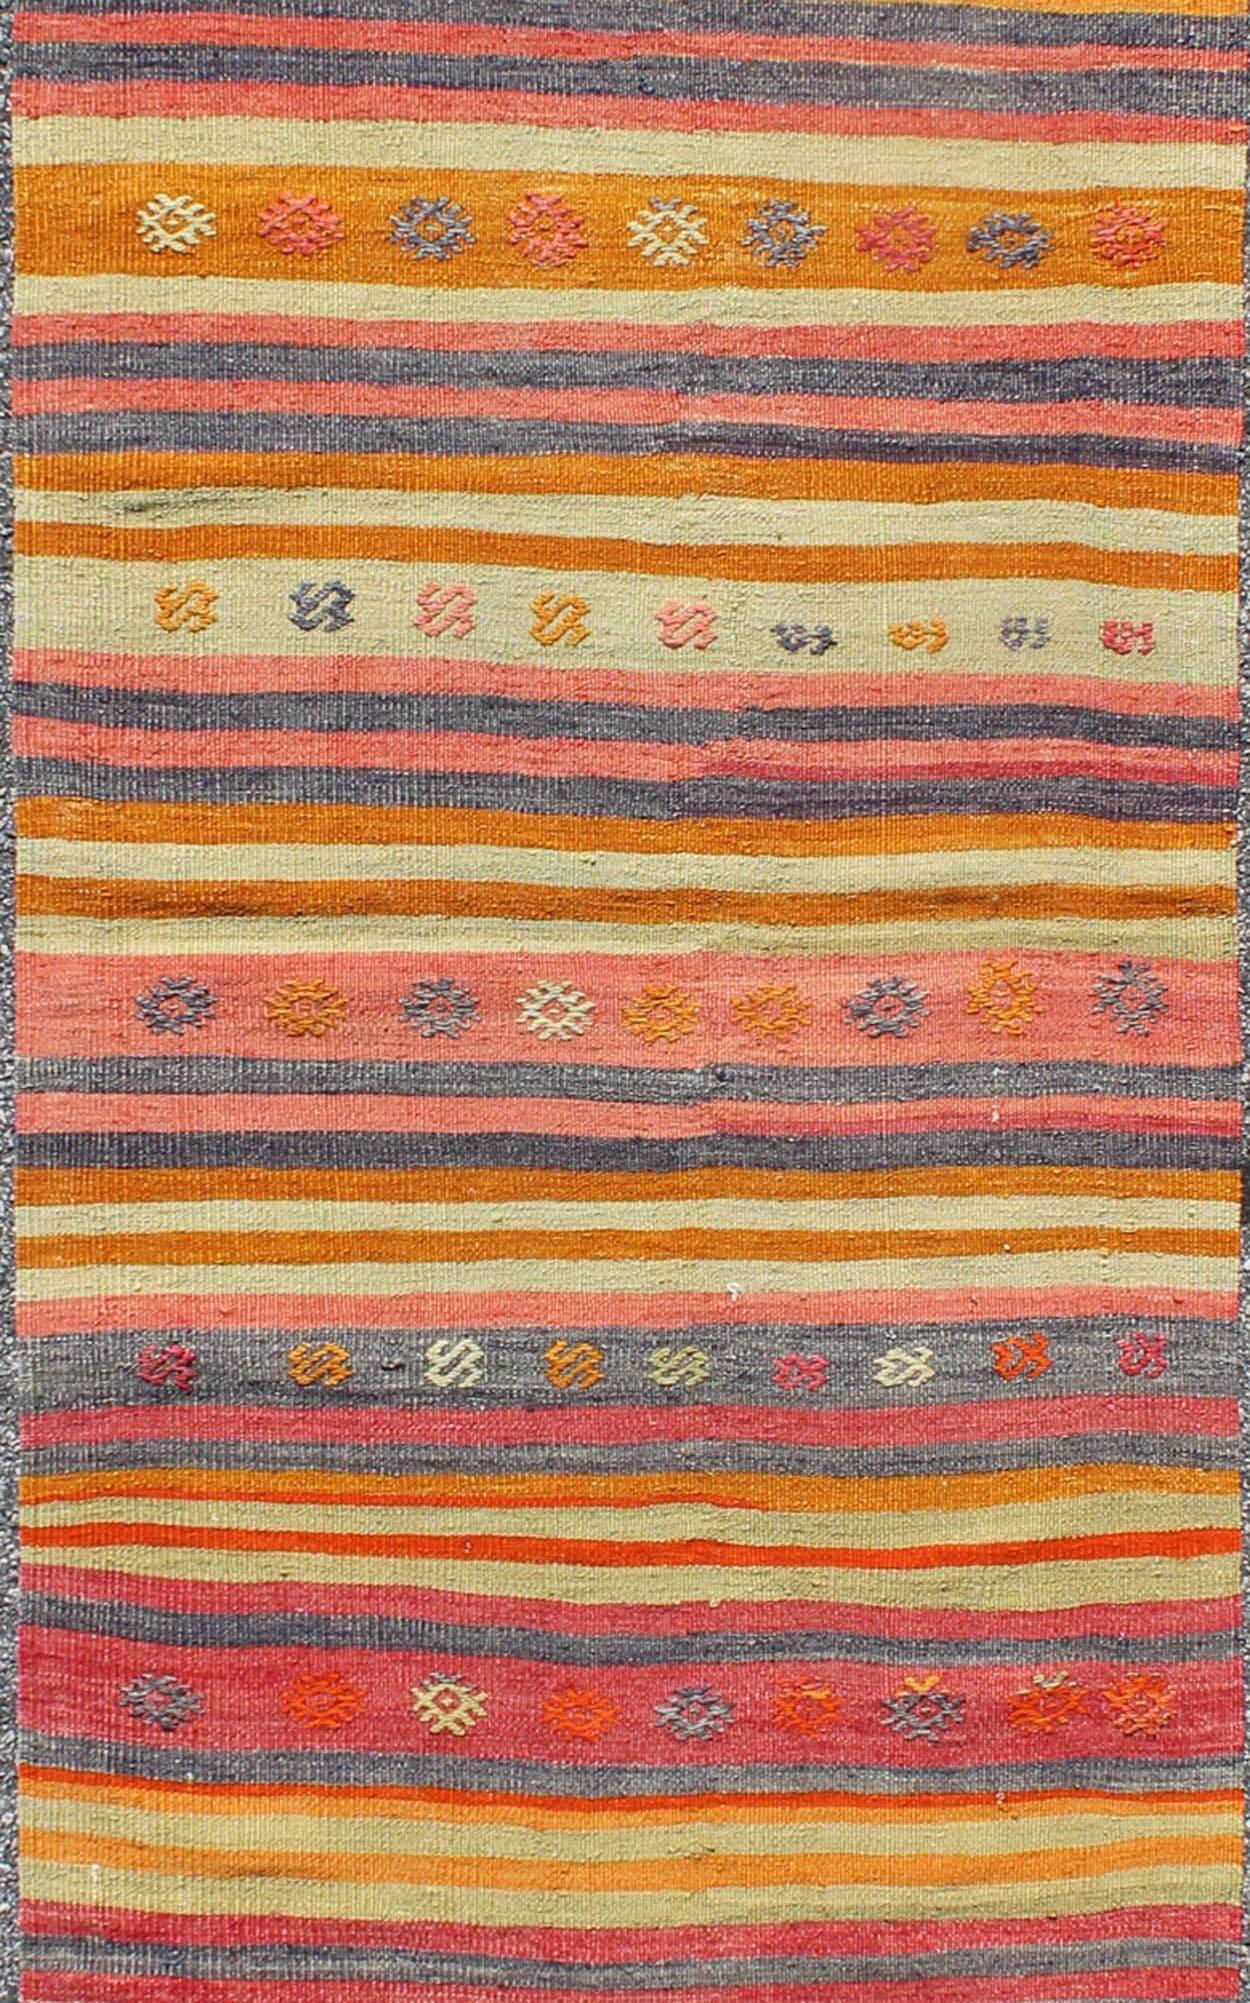 Hand-Woven Vintage Turkish Oushak Rug with Geometric Tribal Designs and Colorful Stripes For Sale